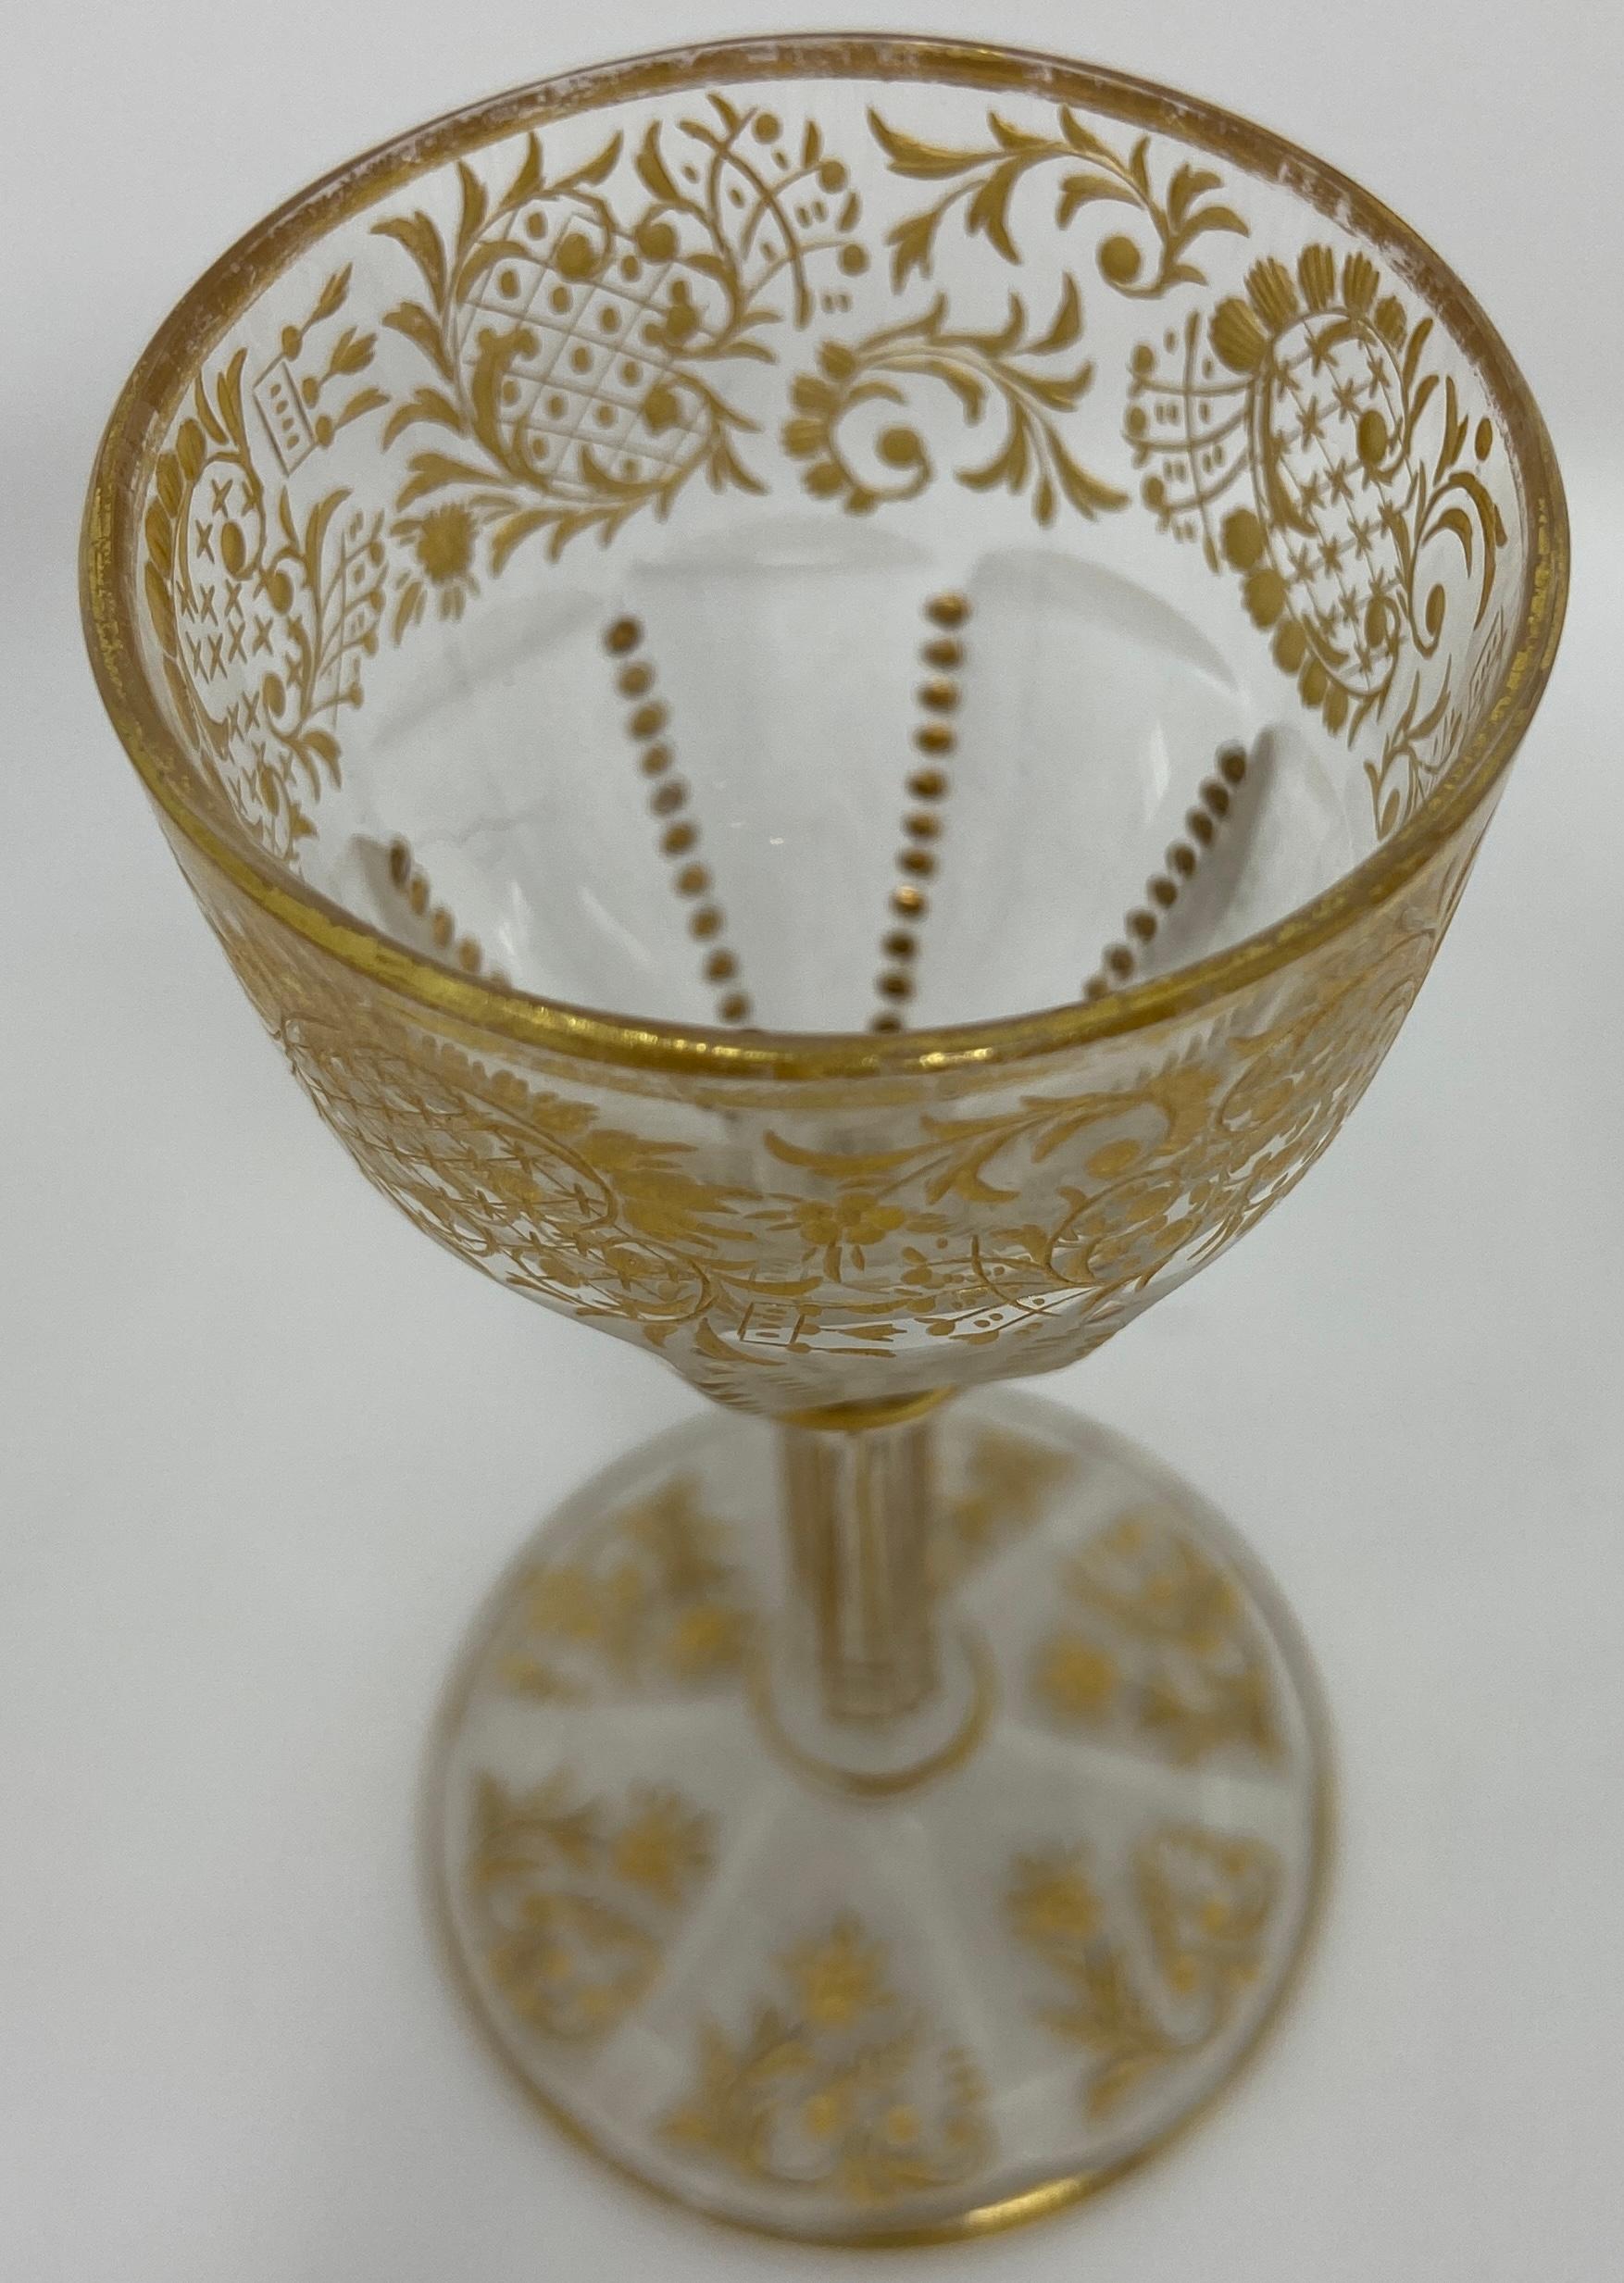 19th Century Set of 10 Antique French Val Saint Lambert Gold-Etched Crystal Cordial Glasses